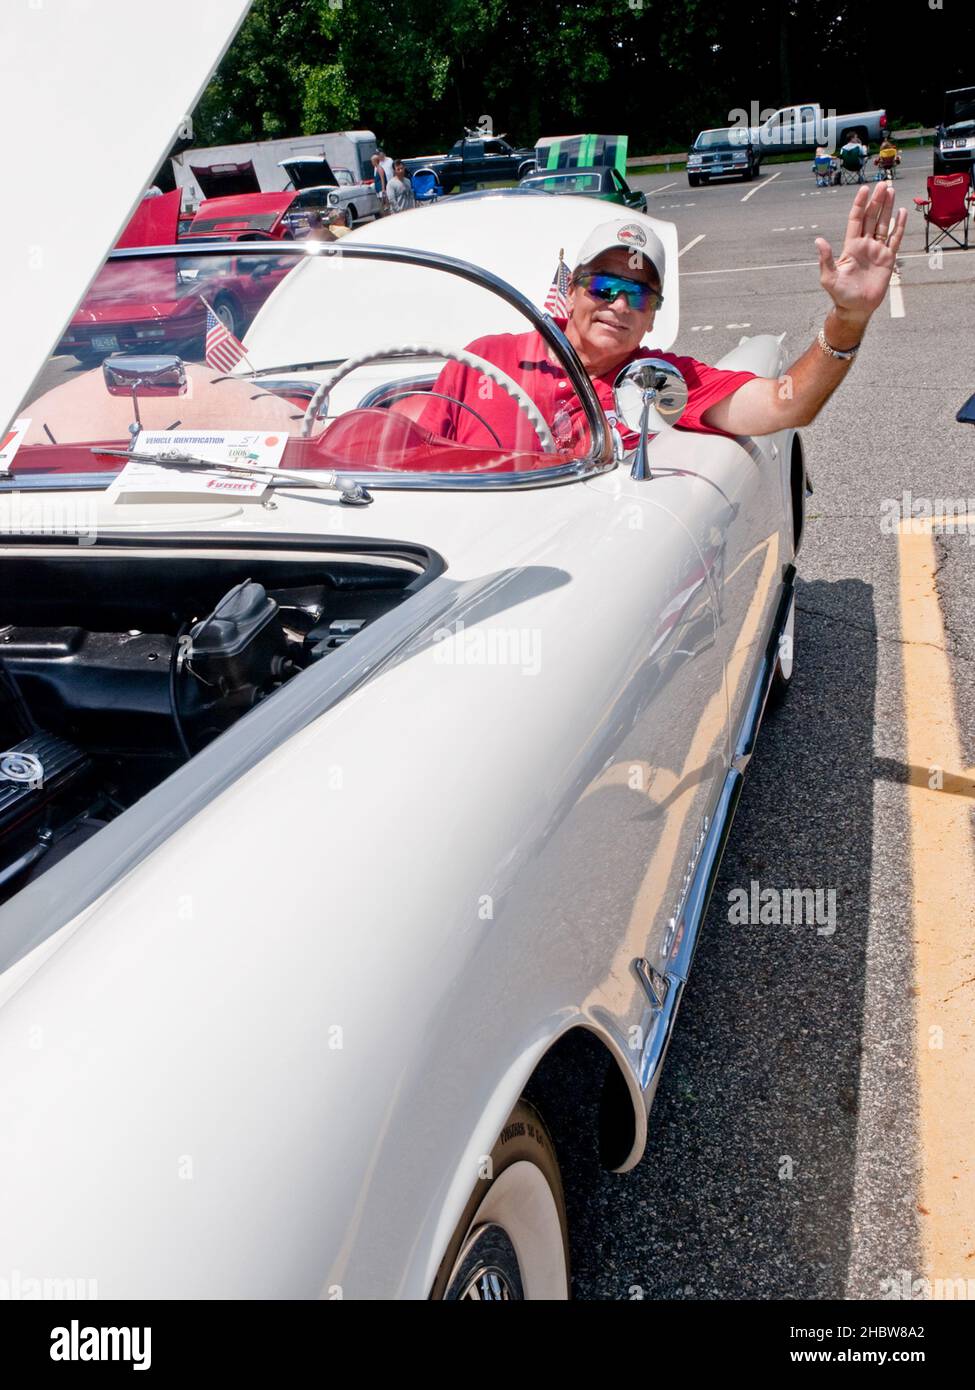 Oakland - July 18 - 22040 Ninth annual Summer Classic Car Show Indian Hills High School.  Ron Banta waves from his 1954 Corvette one of only 3600 made Stock Photo